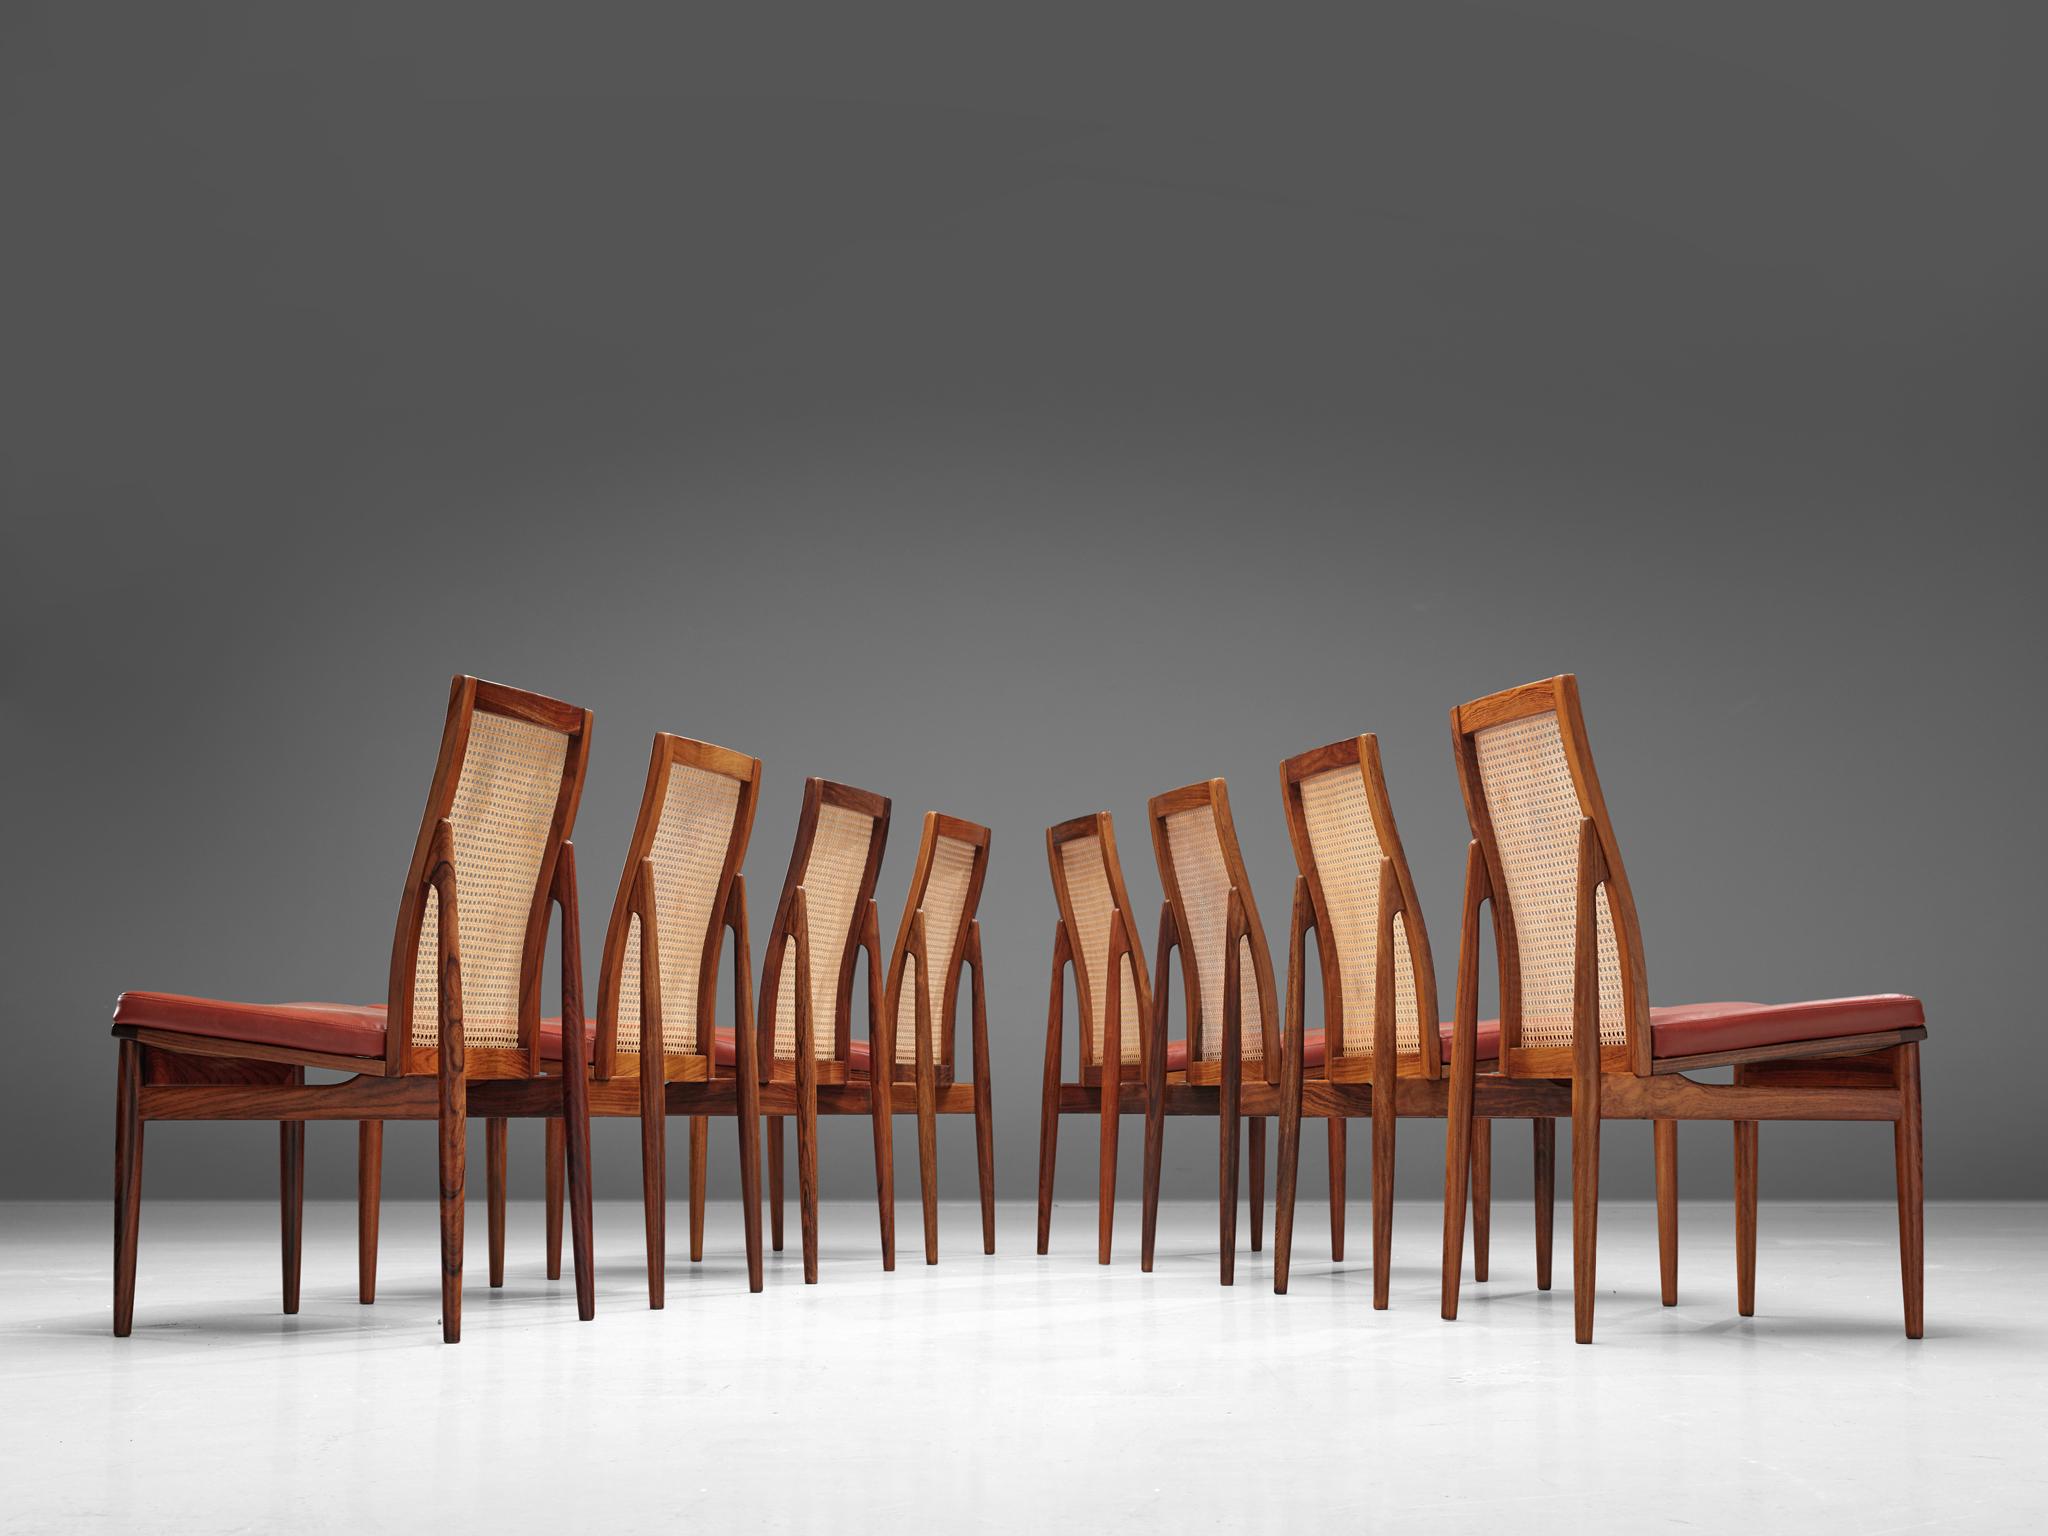 Set of 8 dining chairs, oak, cane and leather, Denmark, 1960s

A beautiful and very comfortable set of eight oak dining chairs, these were made in Denmark. The chairs have been completely restored and reupholstered, which means you'll receive